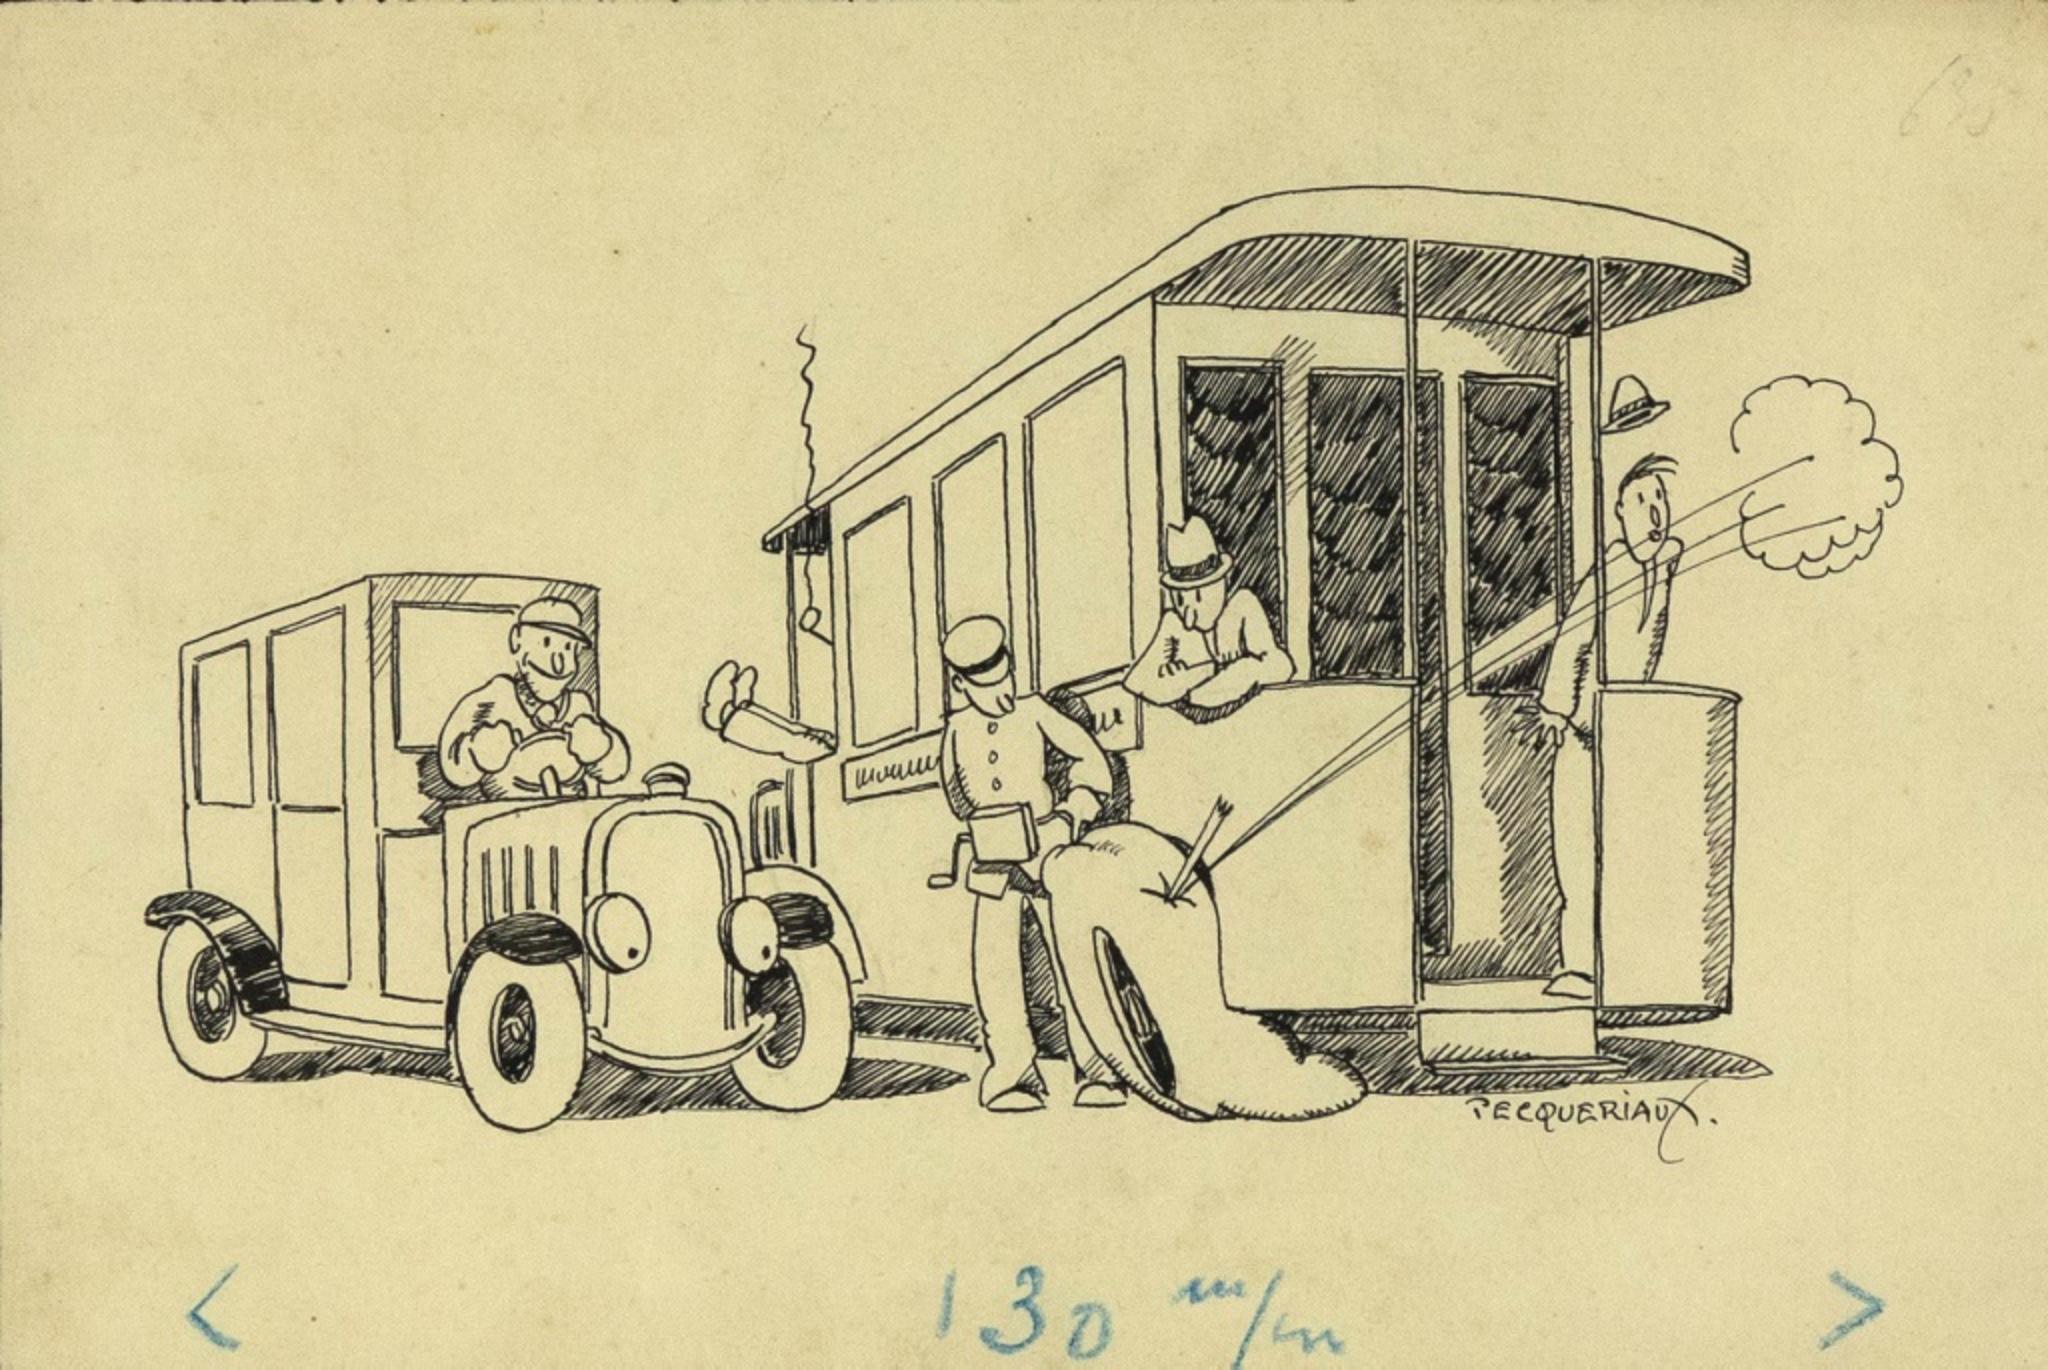 The Bus is an original artwork realized in the 20th century by the artist Henri-Paul Pecqueriaux (1889-1935)

Original china ink drawing on paper. Hand-signed on the lower right margin. Handwritten notes on the lower margin.

Includes frame: 27 x 1